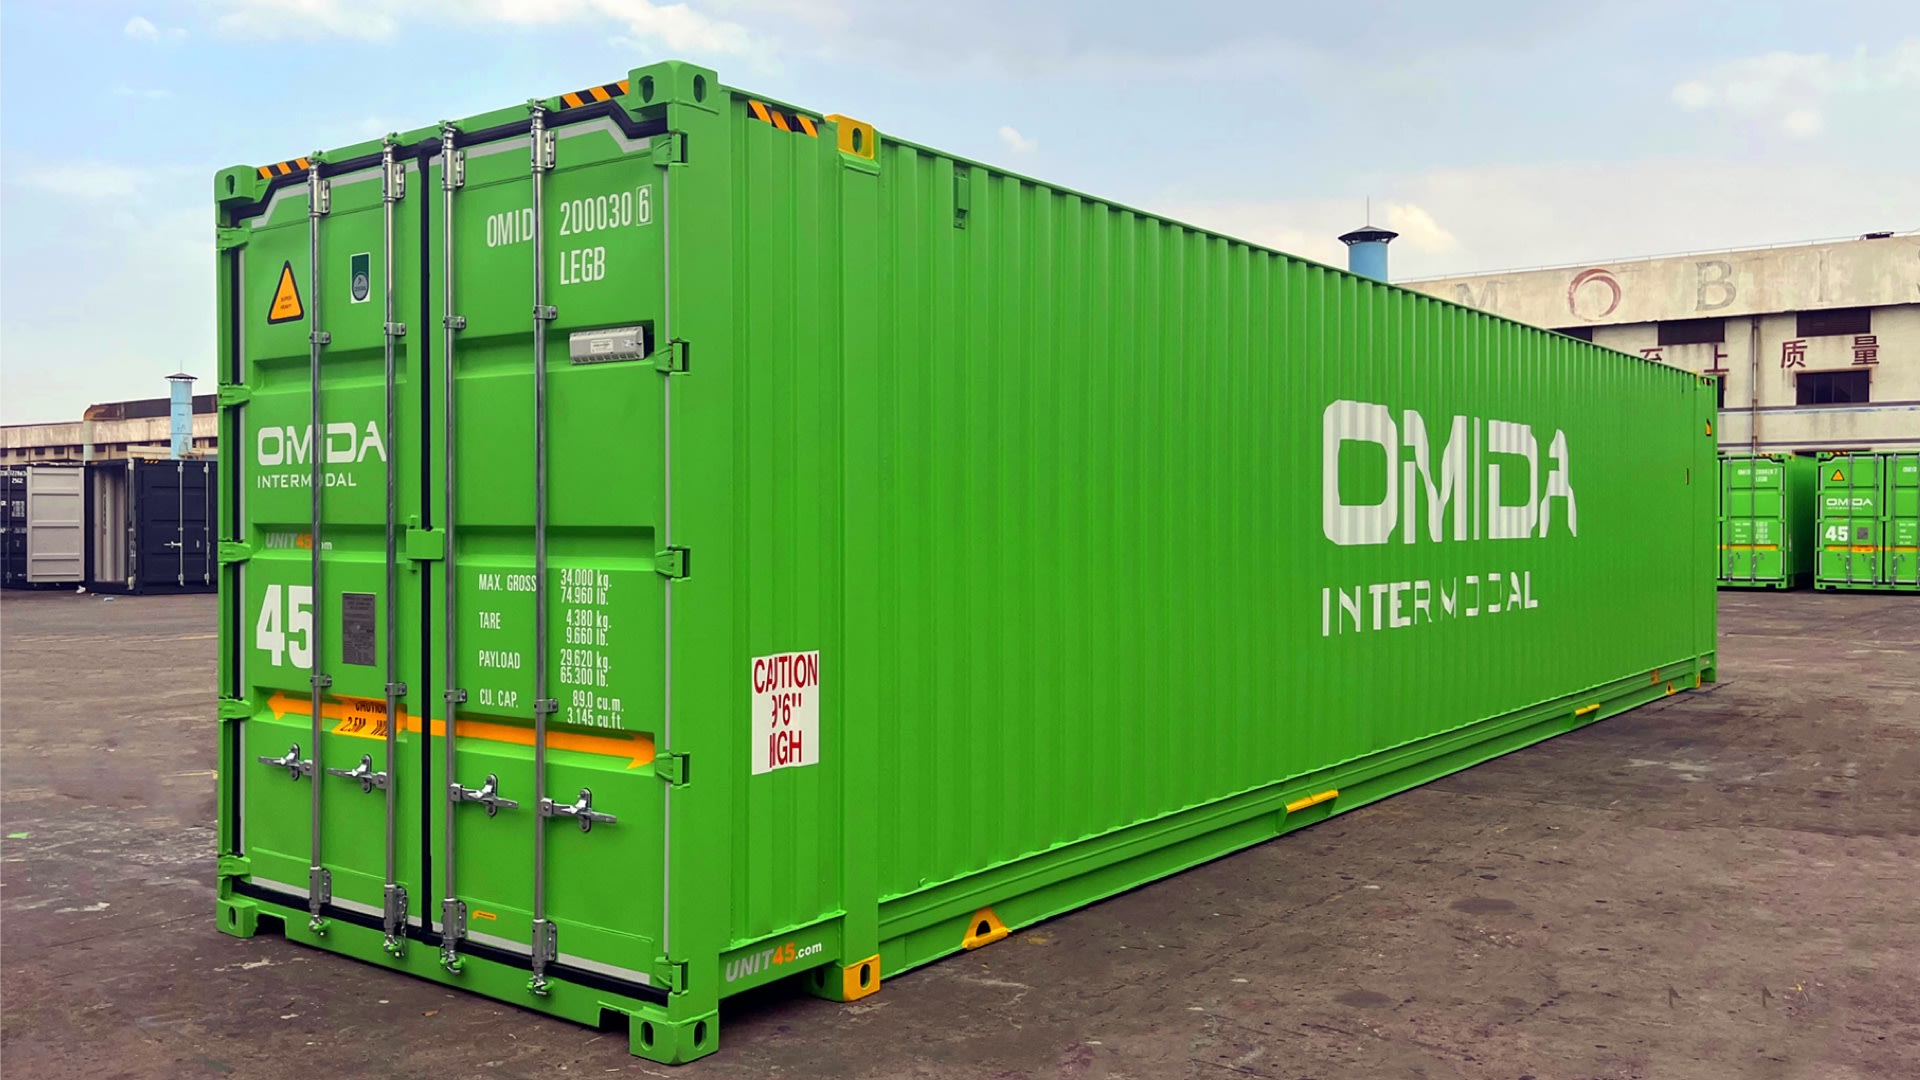  Omida Trade - what will happen with containers? We are entering the container sales market in Poland and Europe. | Omida Logistics